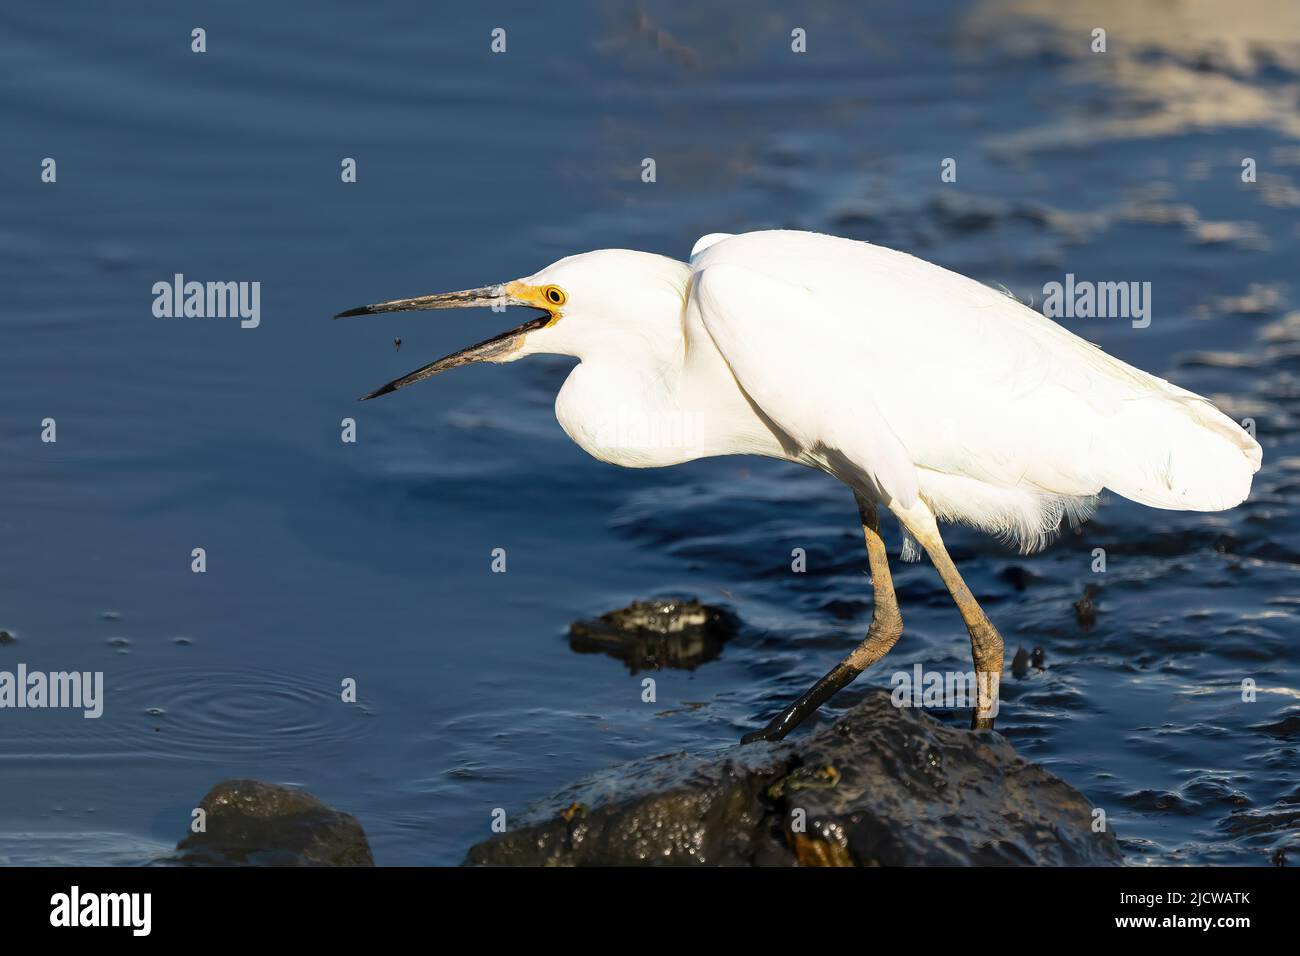 Snowy Egret with a Small Fish Stock Photo